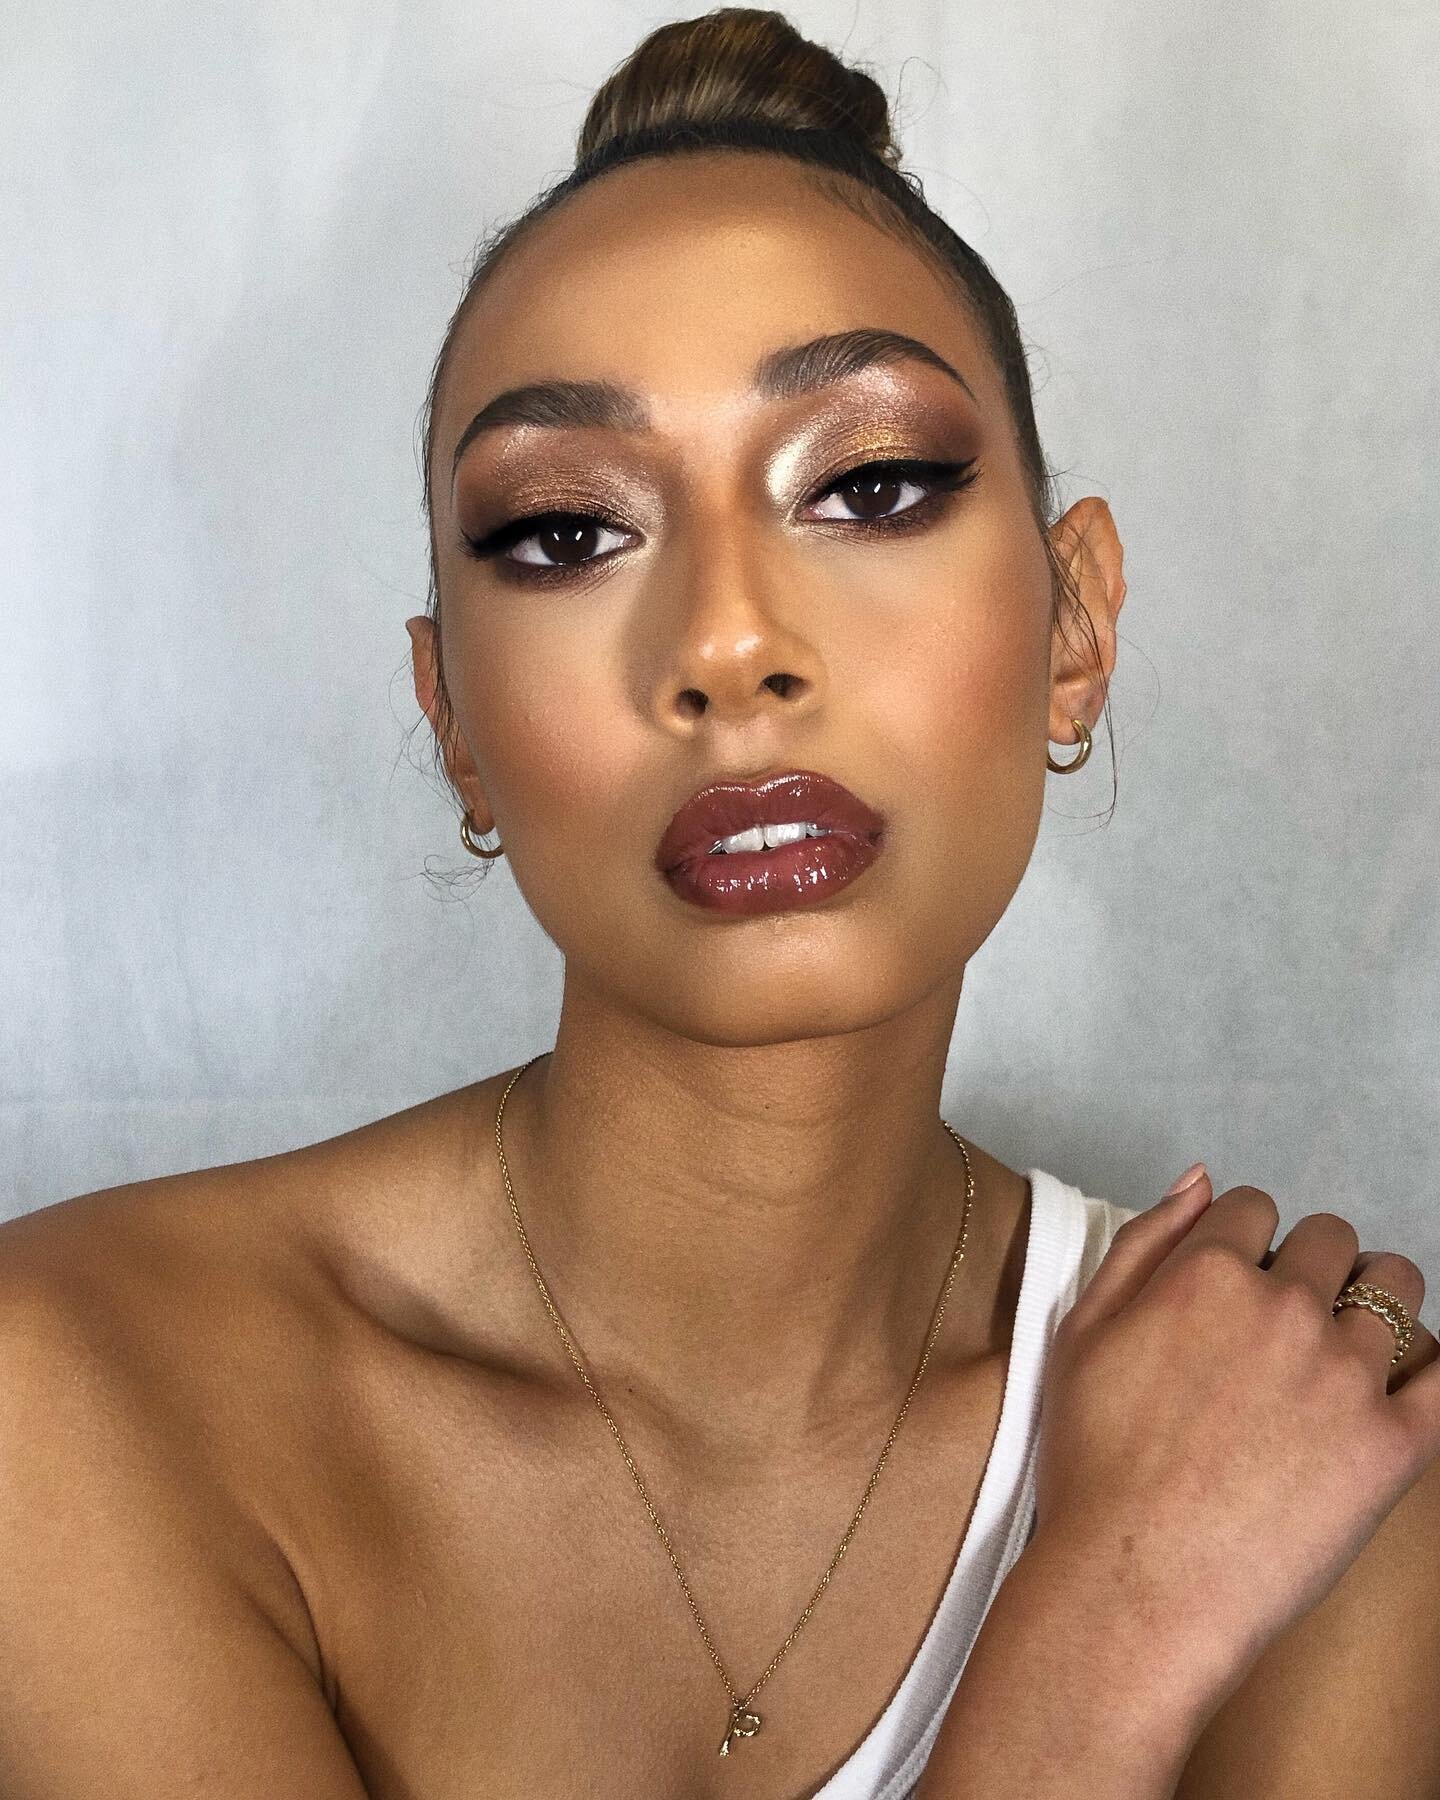 Loving the 90&rsquo;s Glam on beautiful @pepehavea. Used the 90&rsquo;s Chic Lip liner and Nude Gloss Bundle in Deep Chocolate @kkwbeauty. Perfect color for deeper skin tones. 💋#KKWBEAUTY 
.
.
.
.
#makeupartistsydney #muasyd #muasydney #redcarpetmak